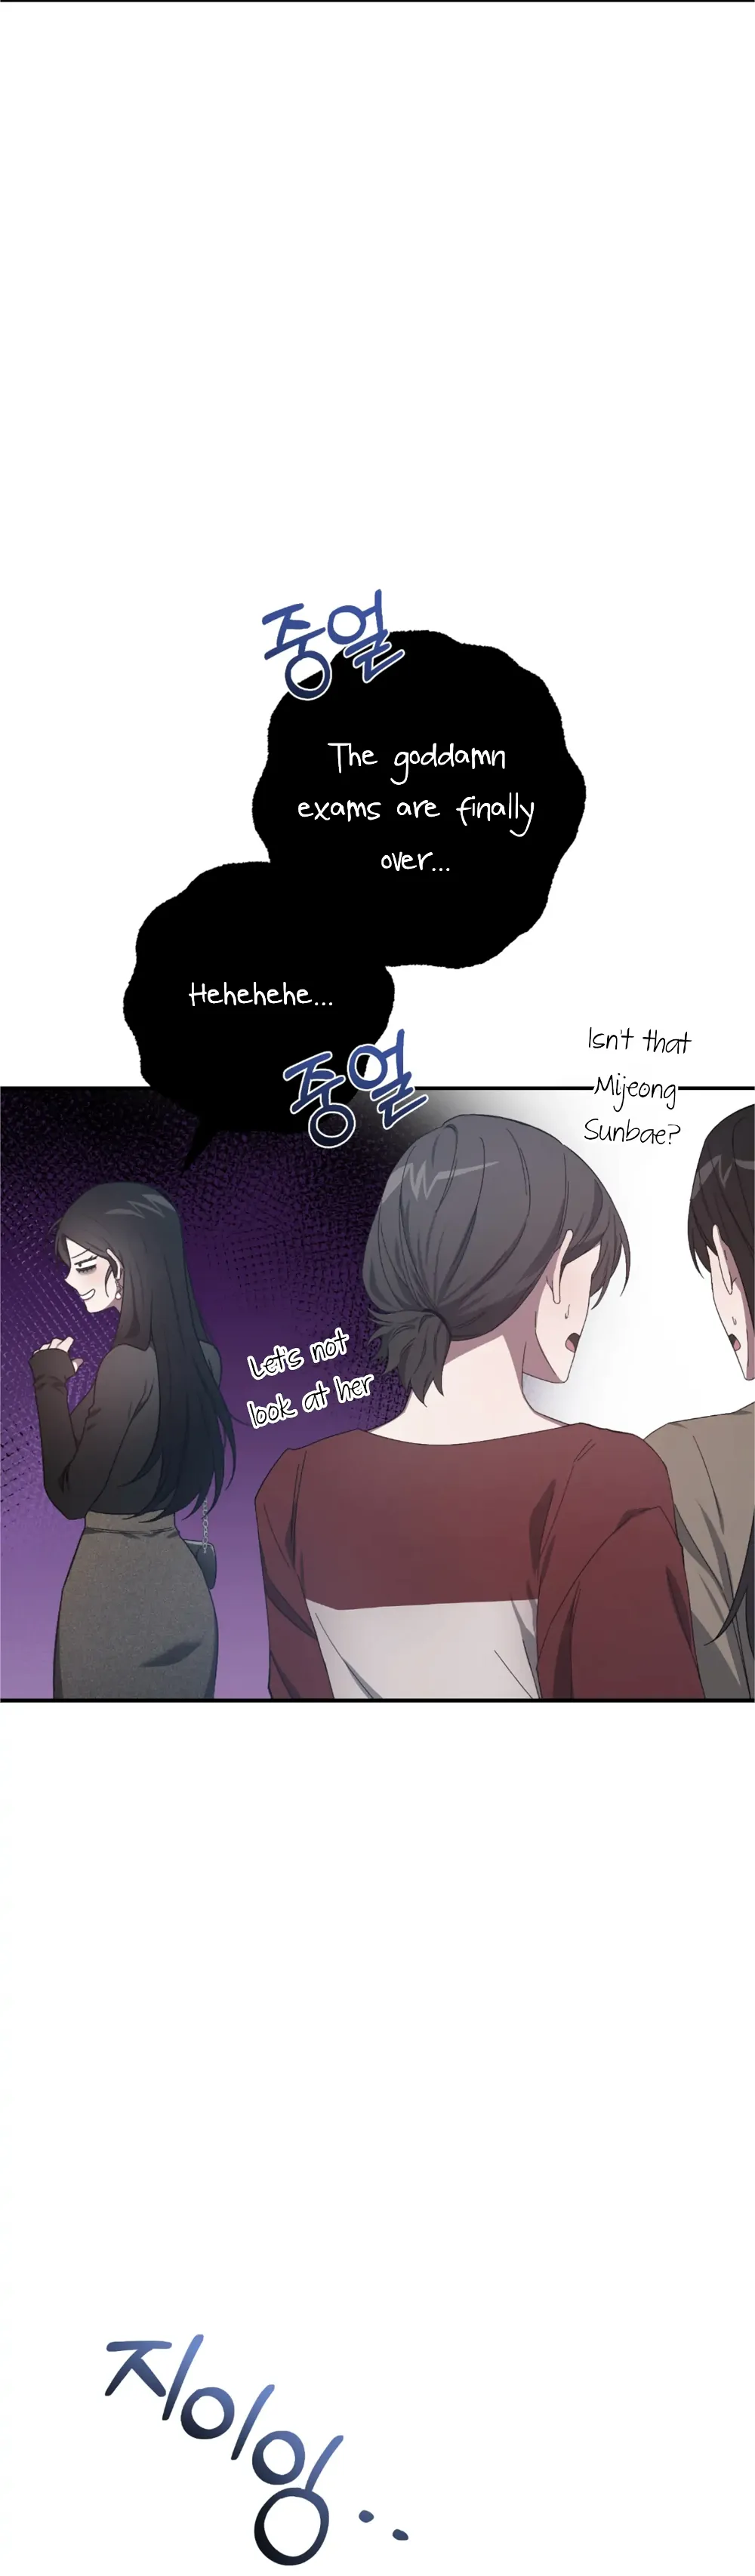 Mijeong’s Relationships chapter 24 - Page 3